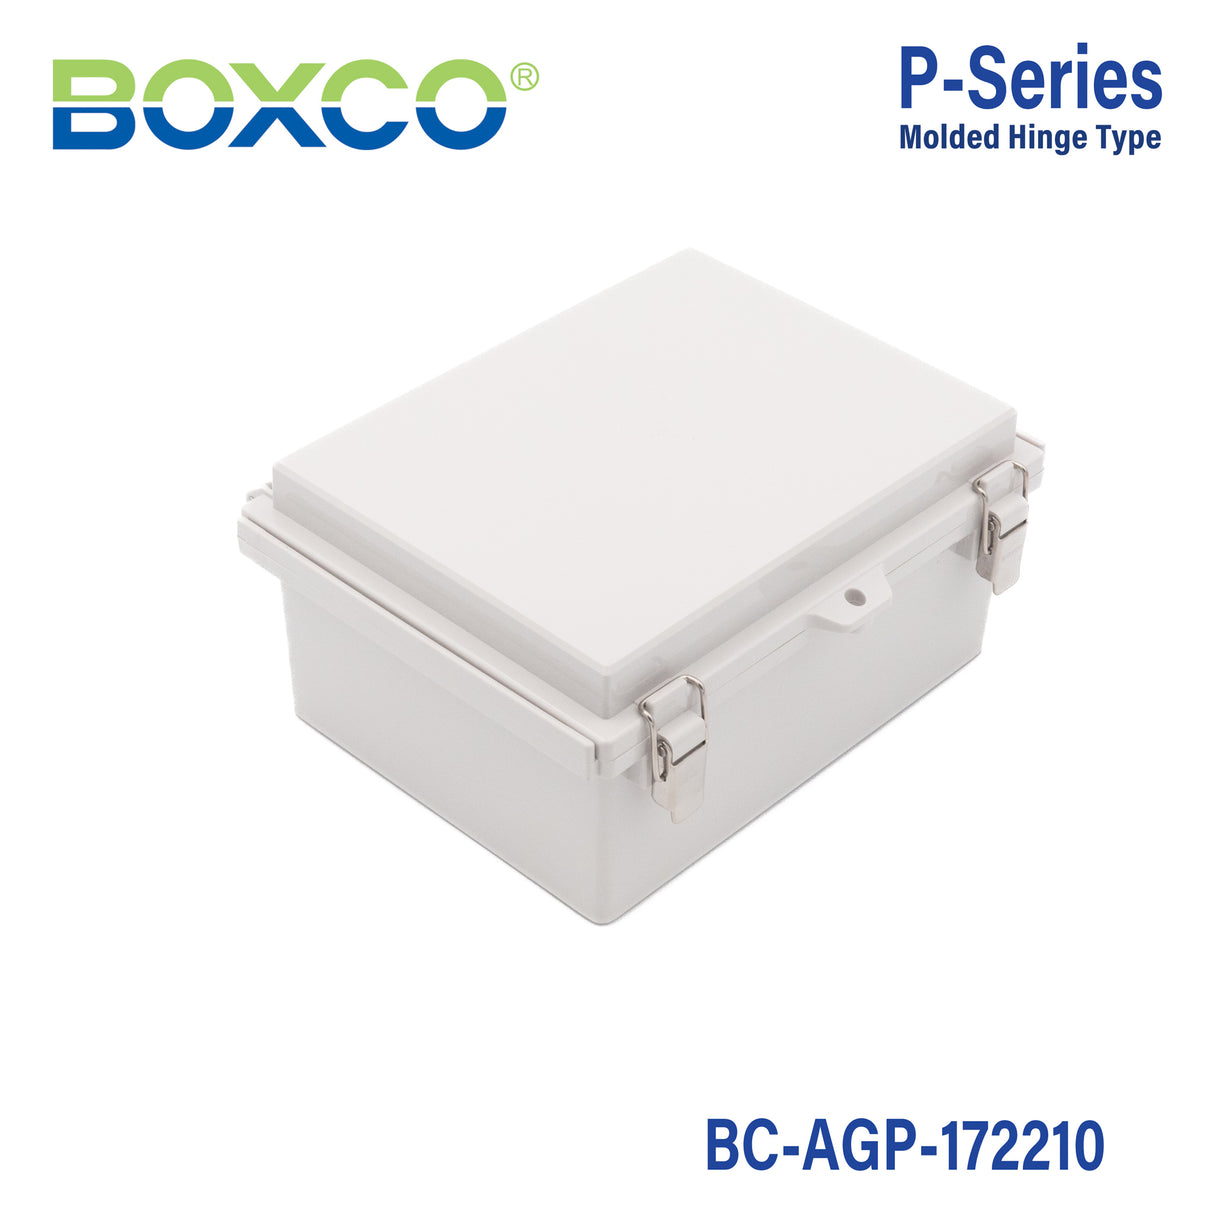 Boxco P-Series 170x220x100mm Plastic Enclosure, IP67, IK08, ABS, Grey Cover, Molded Hinge and Latch Type